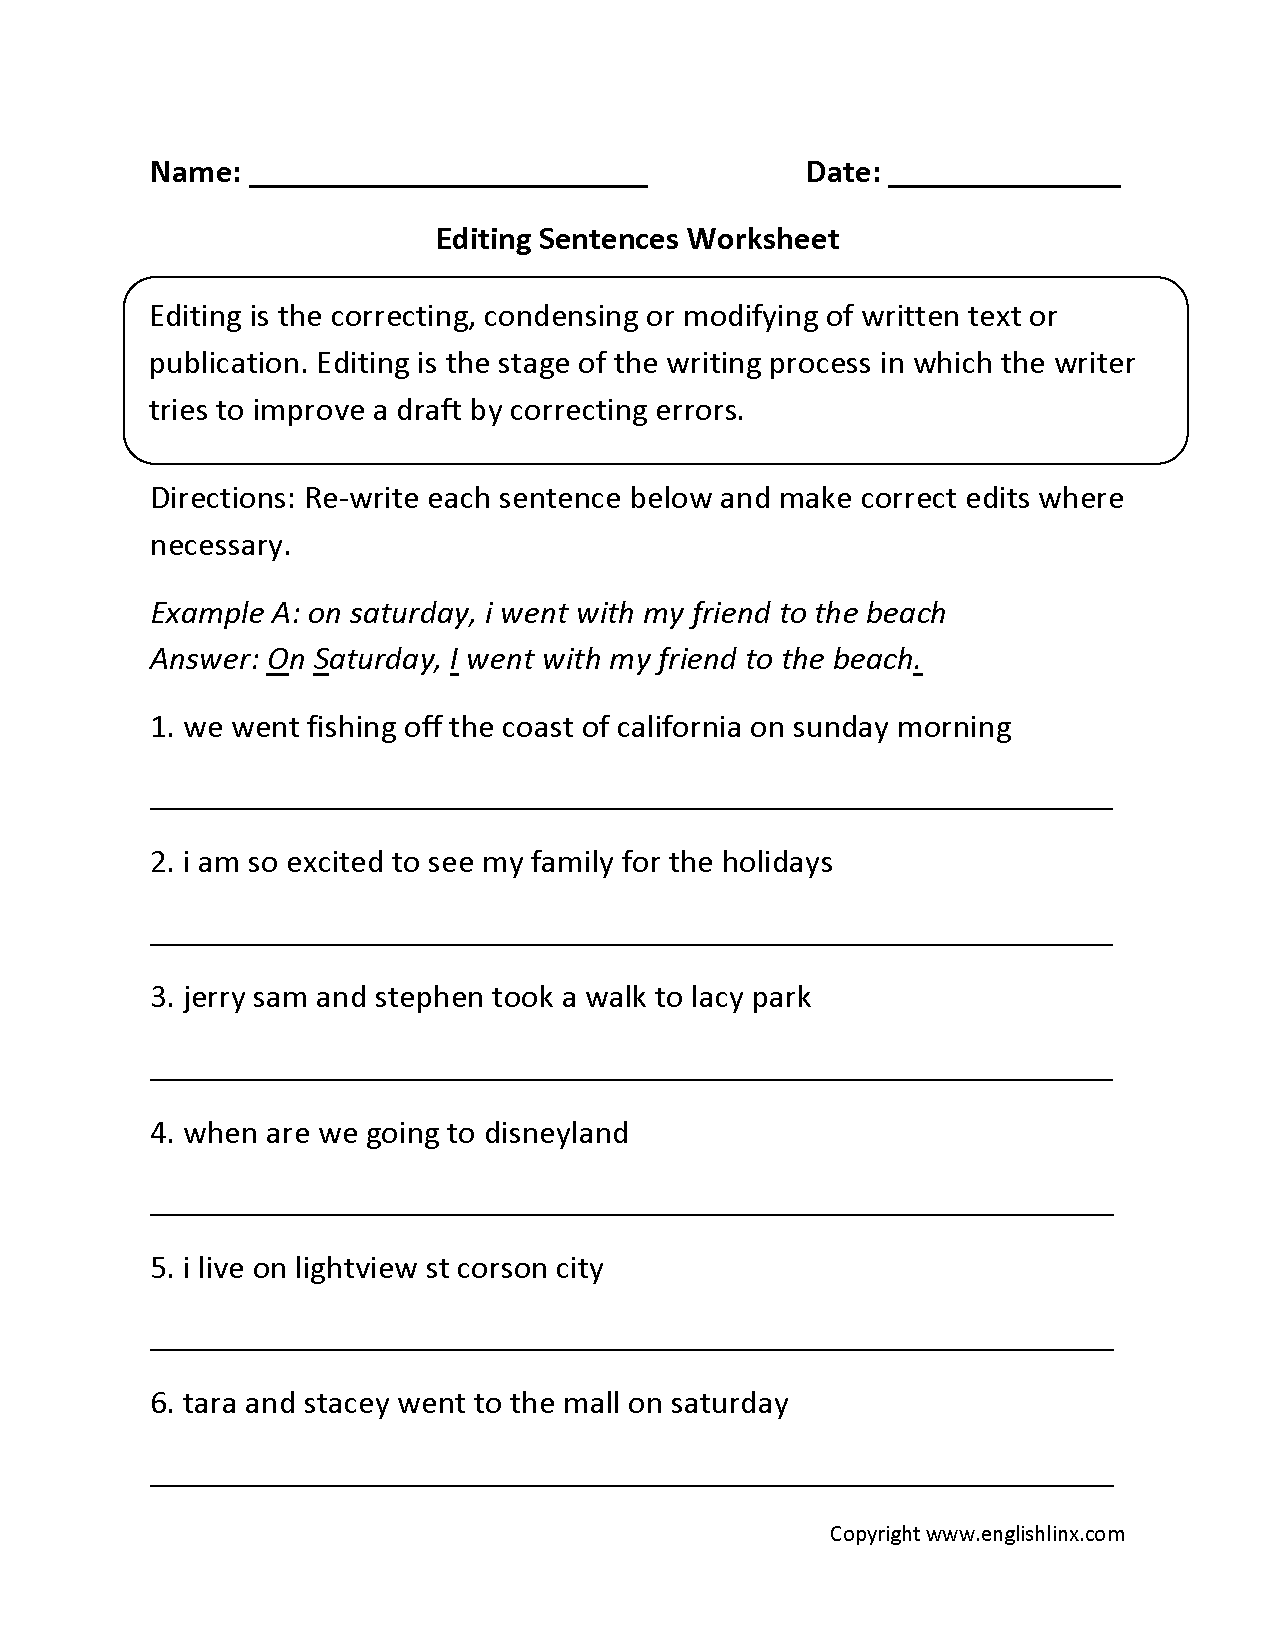 14 Best Images of Editing Sentences Worksheets 4th Grade  4th Grade Sentence Writing Worksheets 